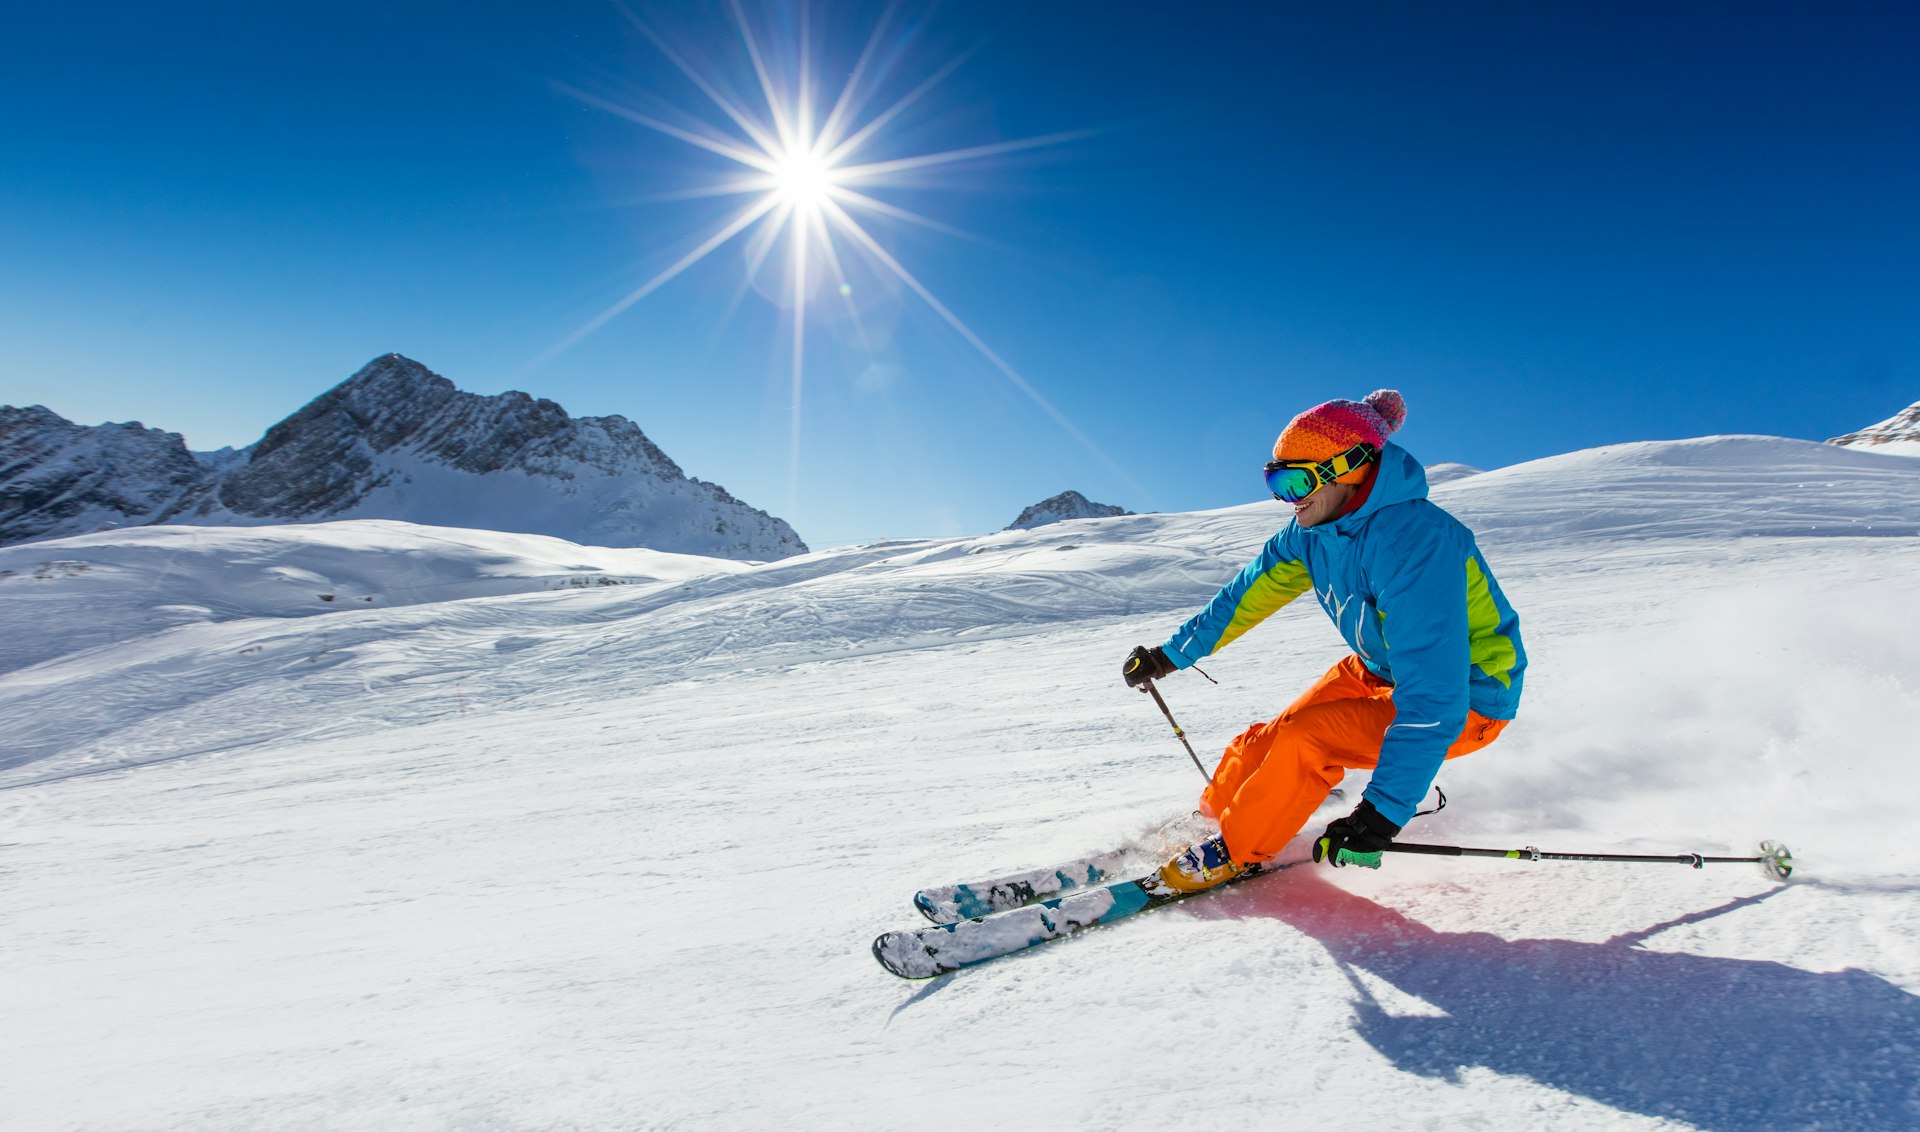 Skier skiing downhill during sunny day in high mountains in Italy 